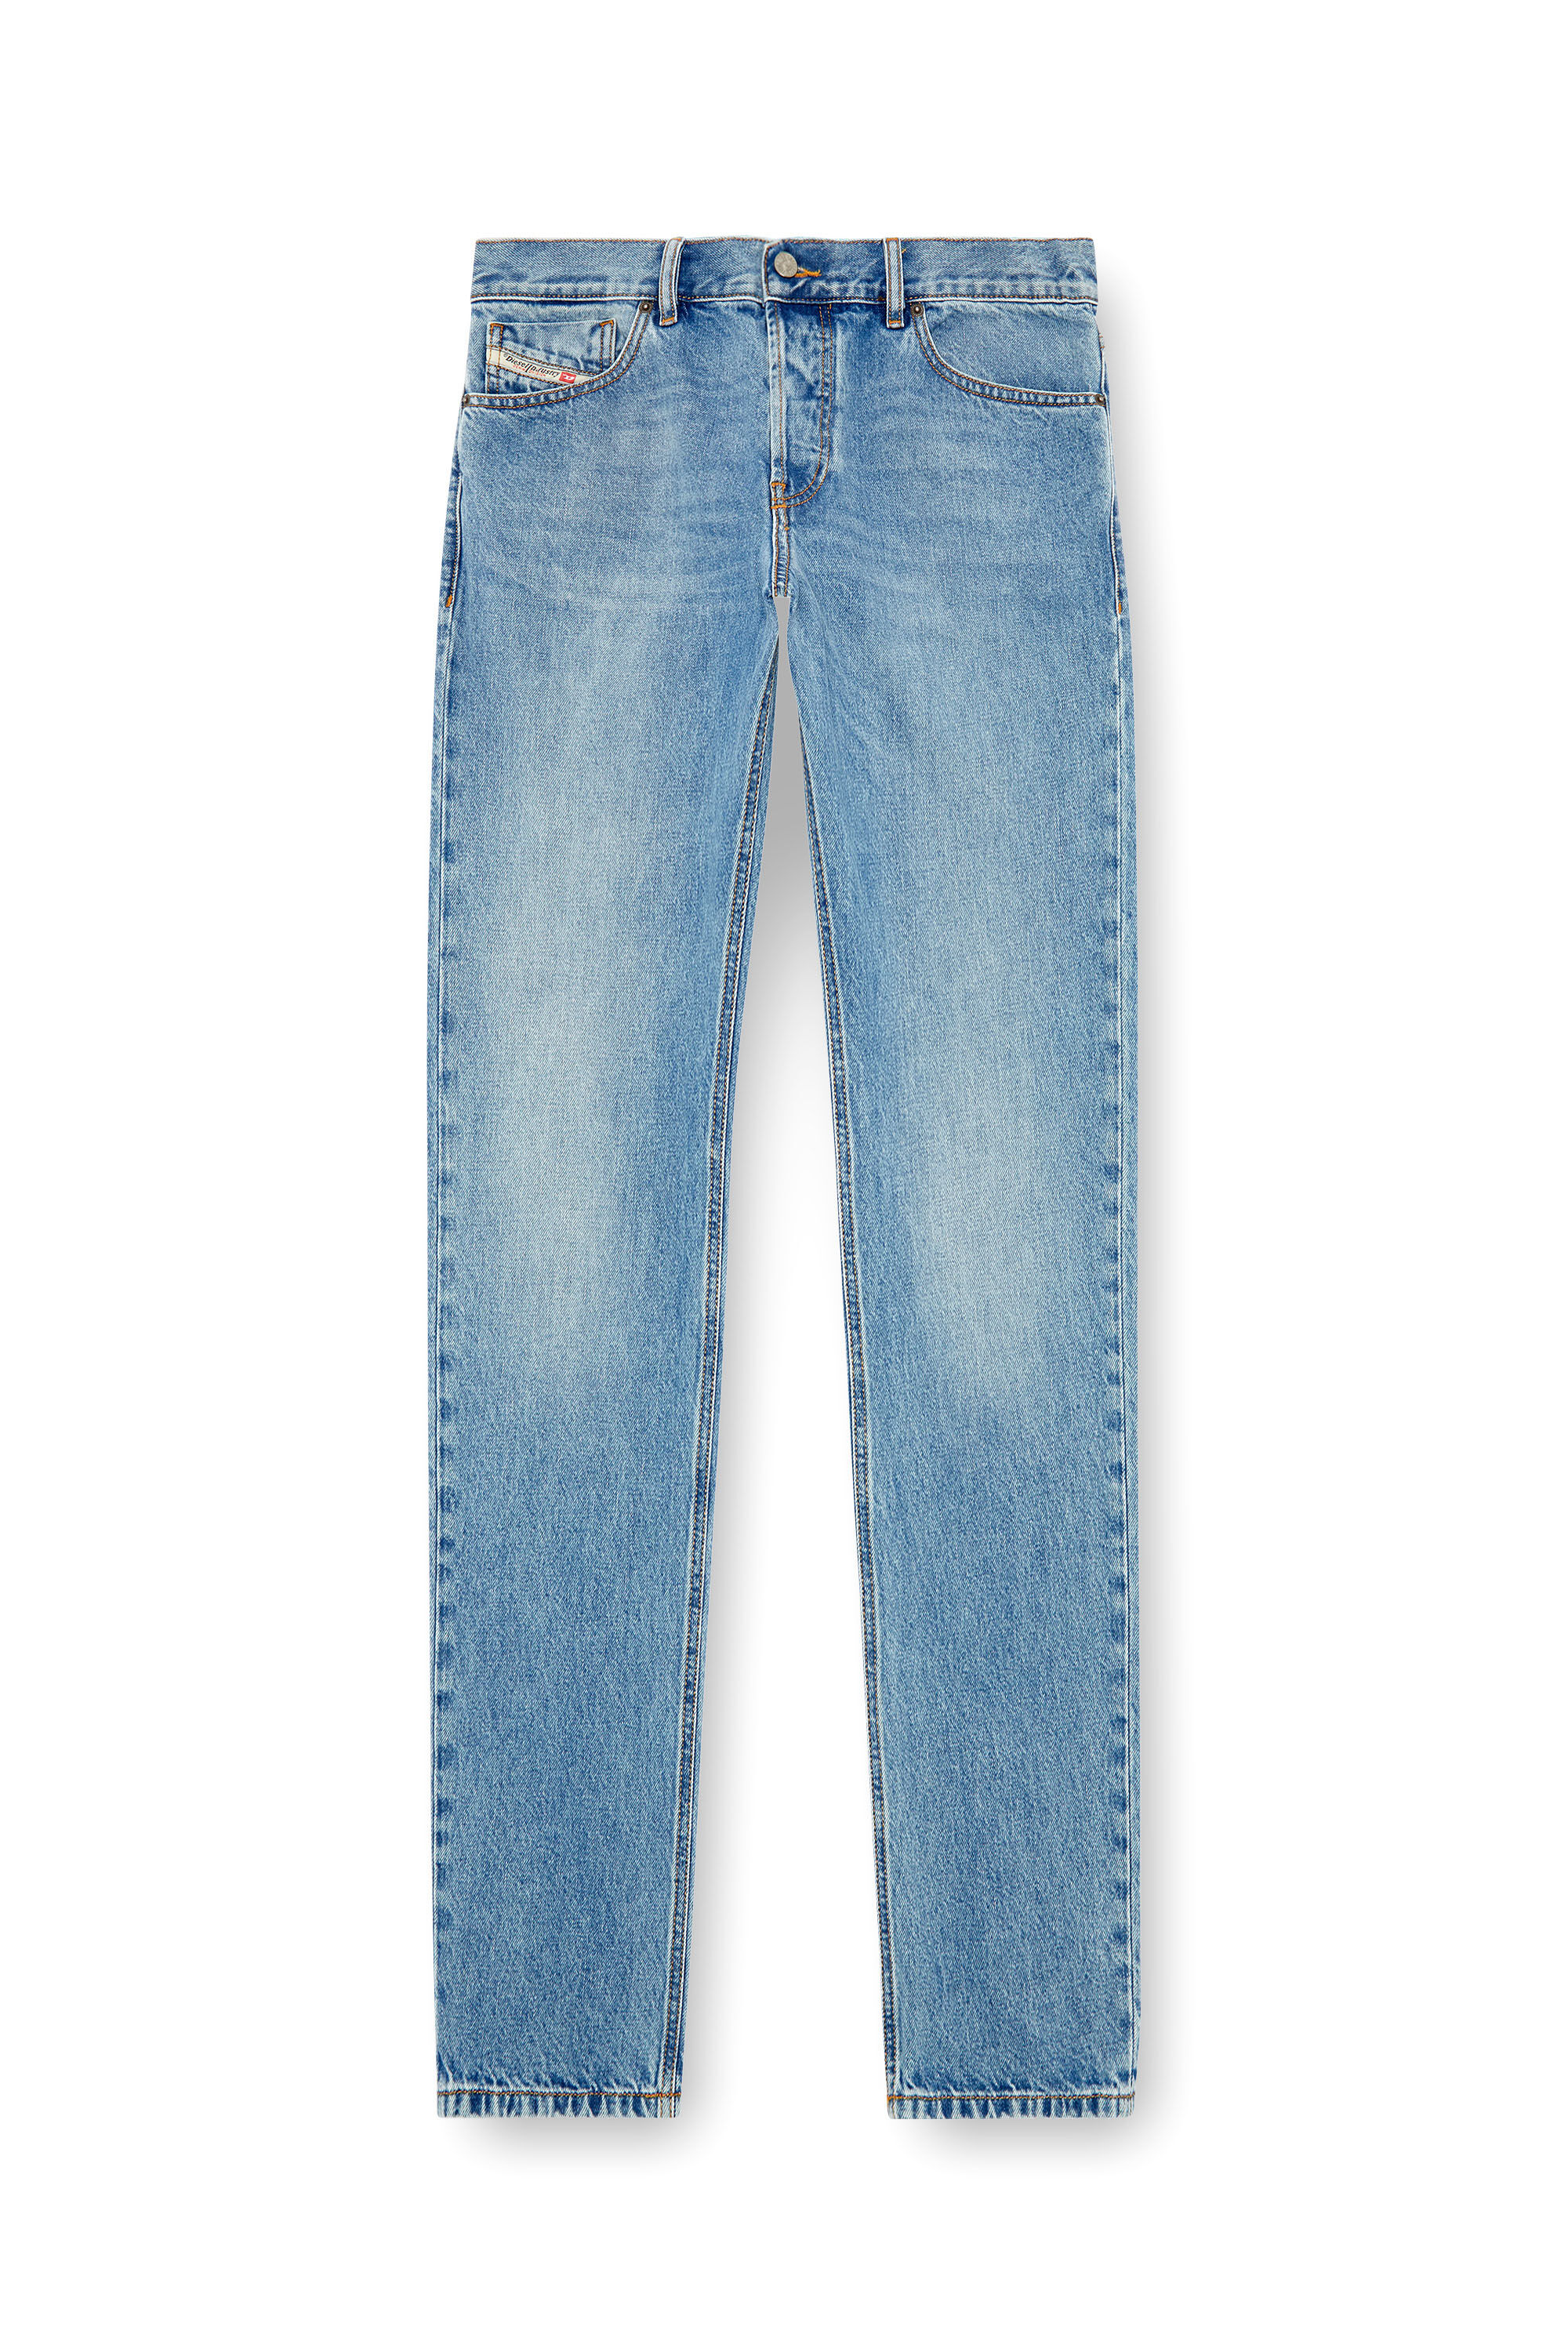 Diesel - Straight Jeans 1995 D-Sark 09I29, Hombre Straight Jeans - 1995 D-Sark in Azul marino - Image 2